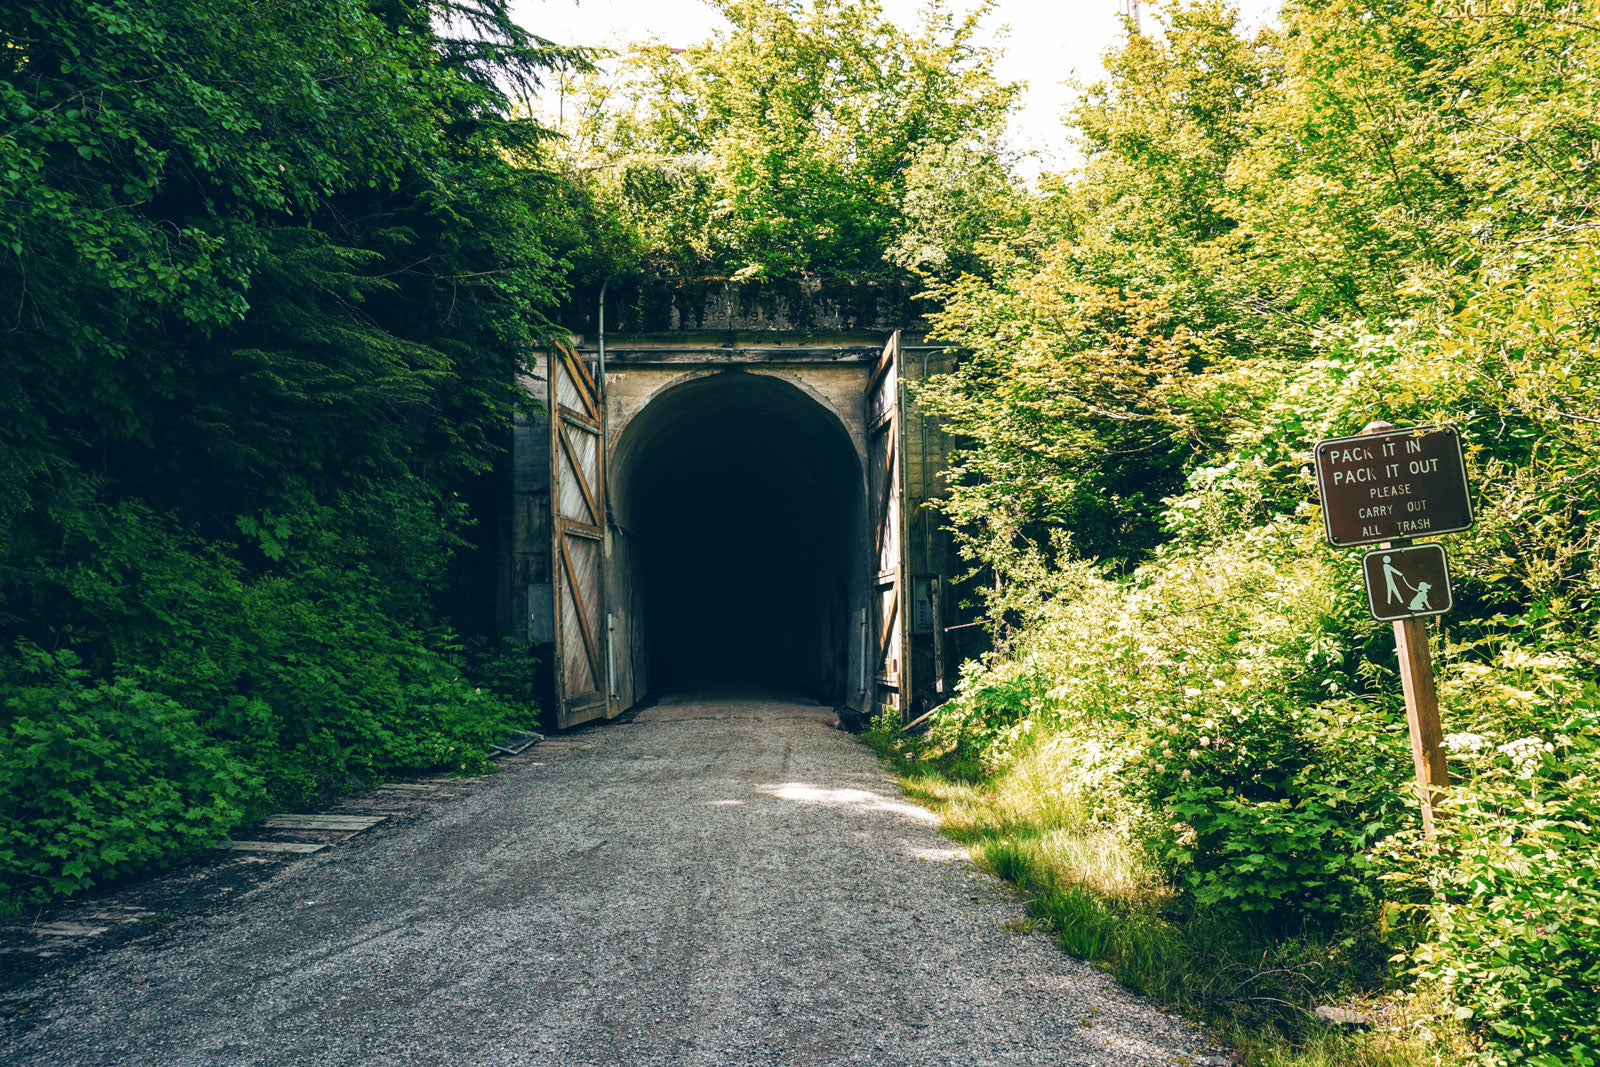 Six Little Known Attractions in Washington - Snoqualmie Tunnel